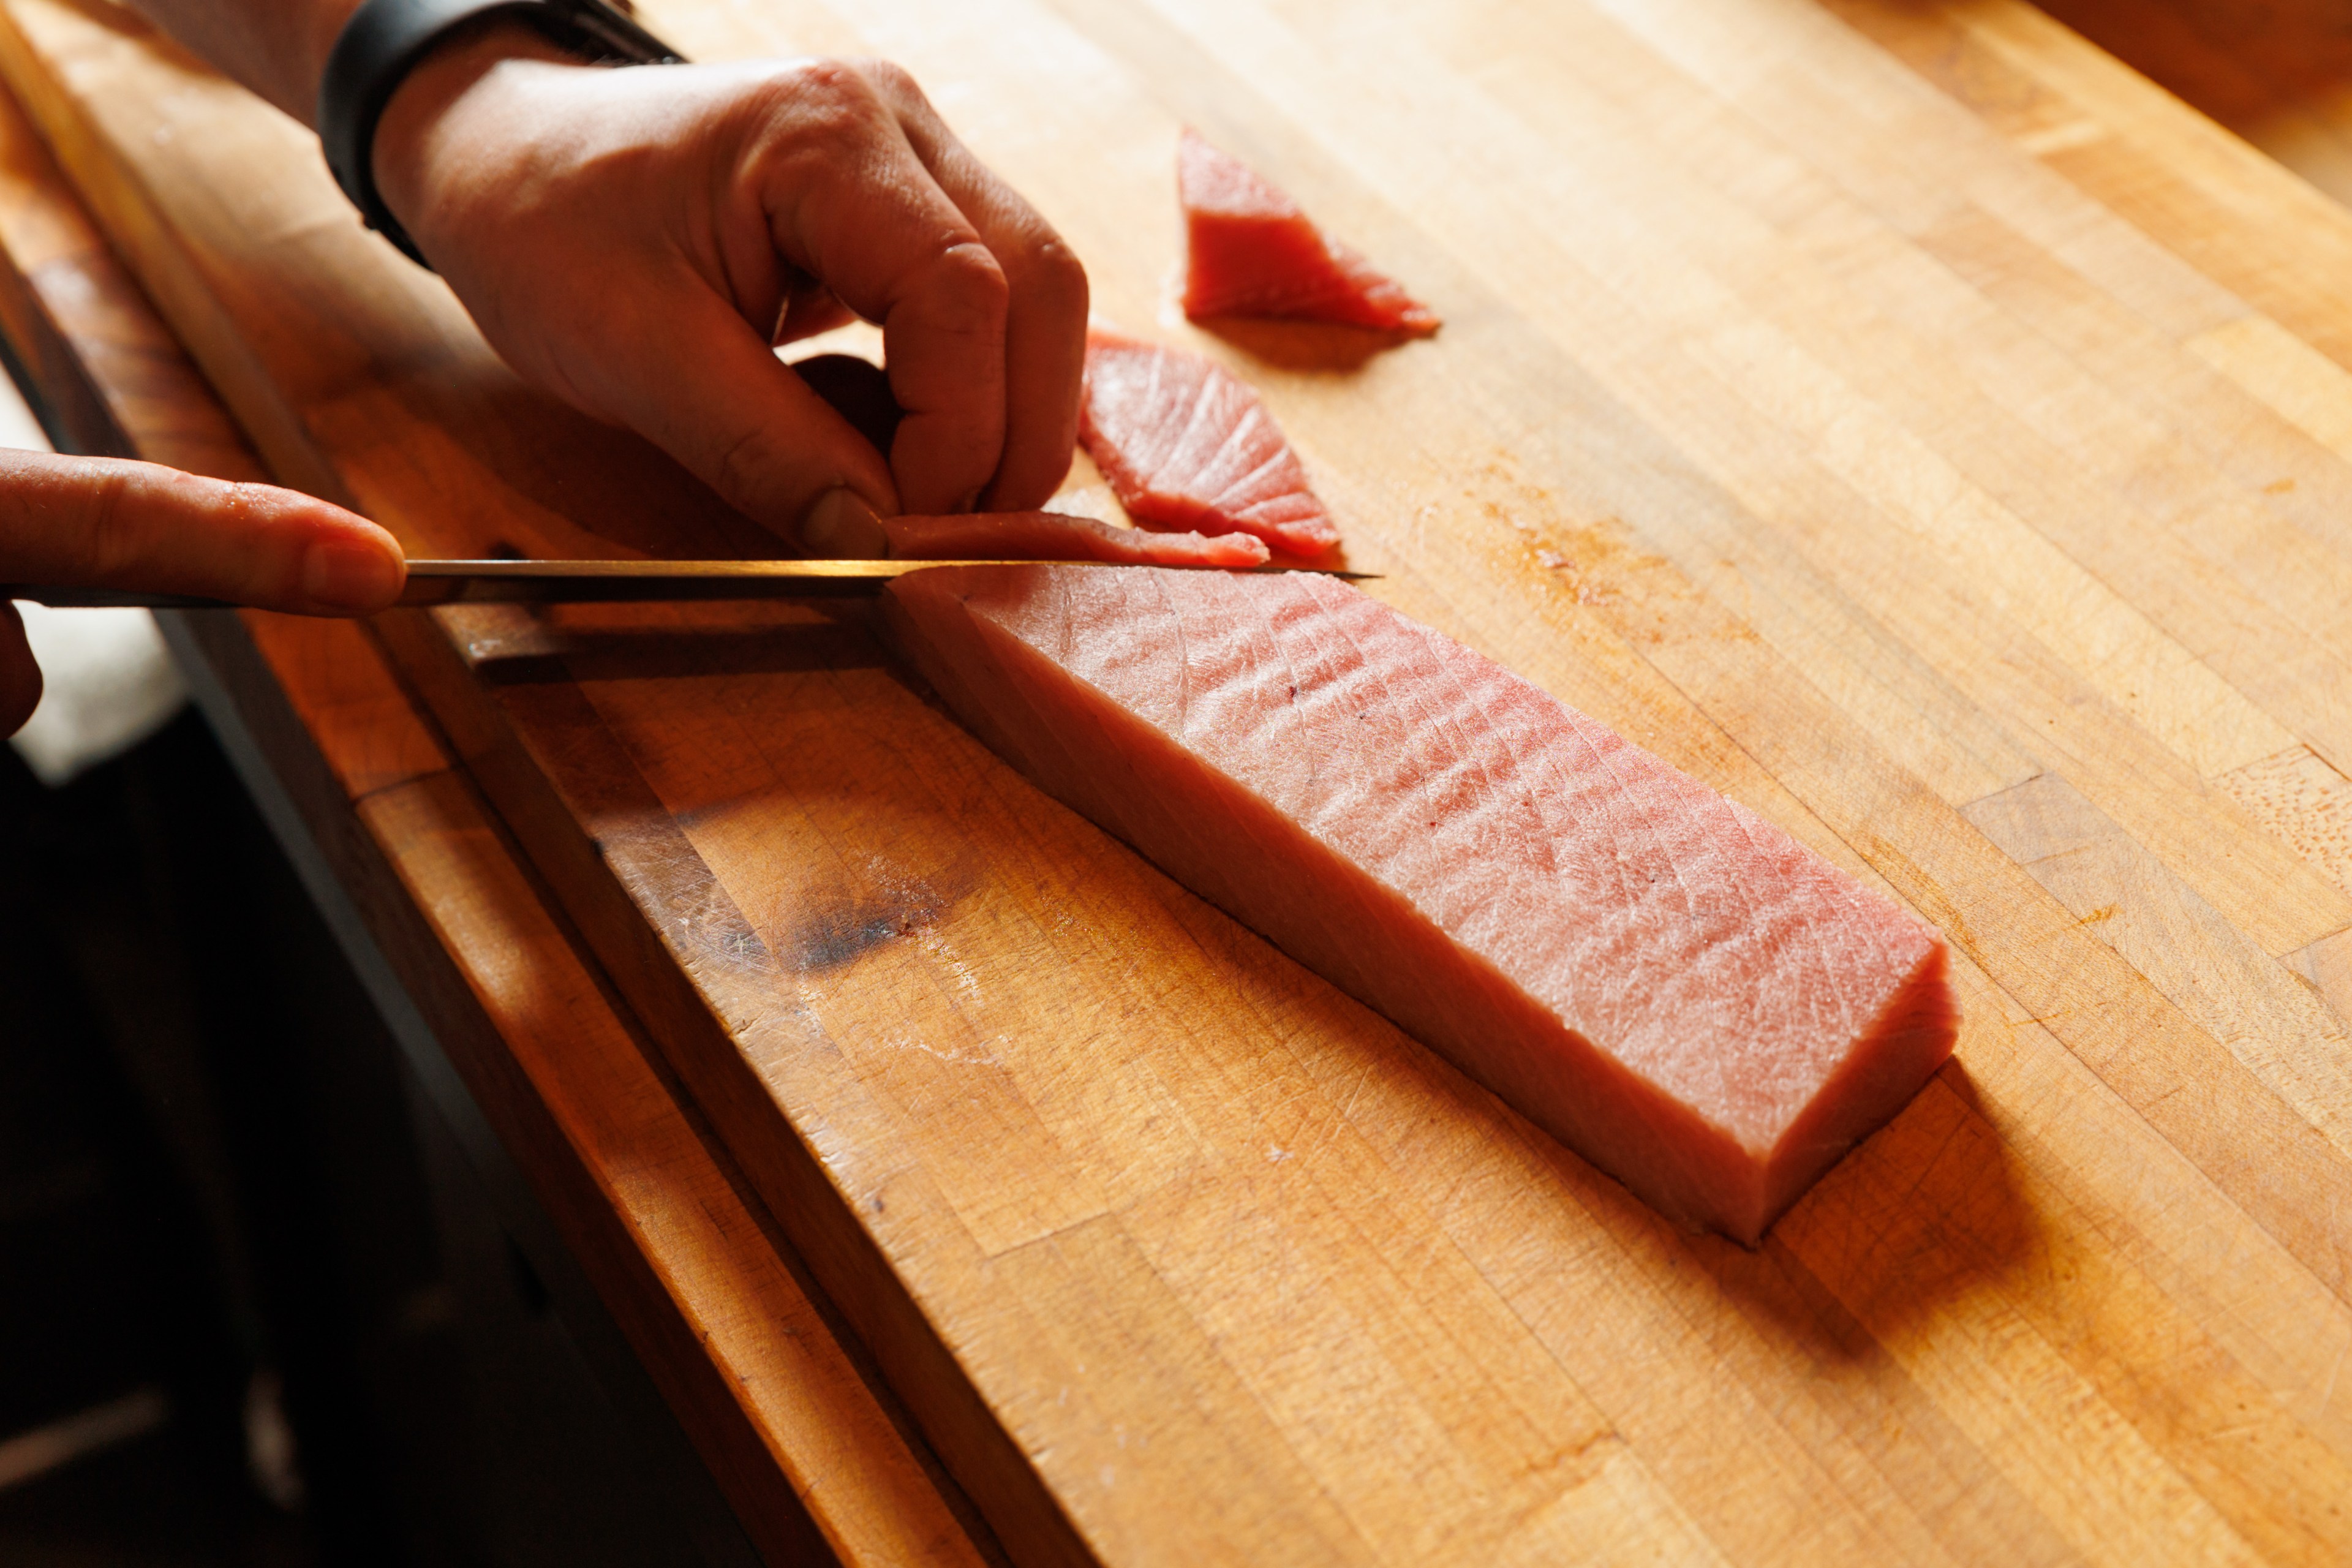 A person uses chopsticks to delicately slice raw tuna on a wooden cutting board. The tuna has a firm, pink texture, and a piece has already been cut.